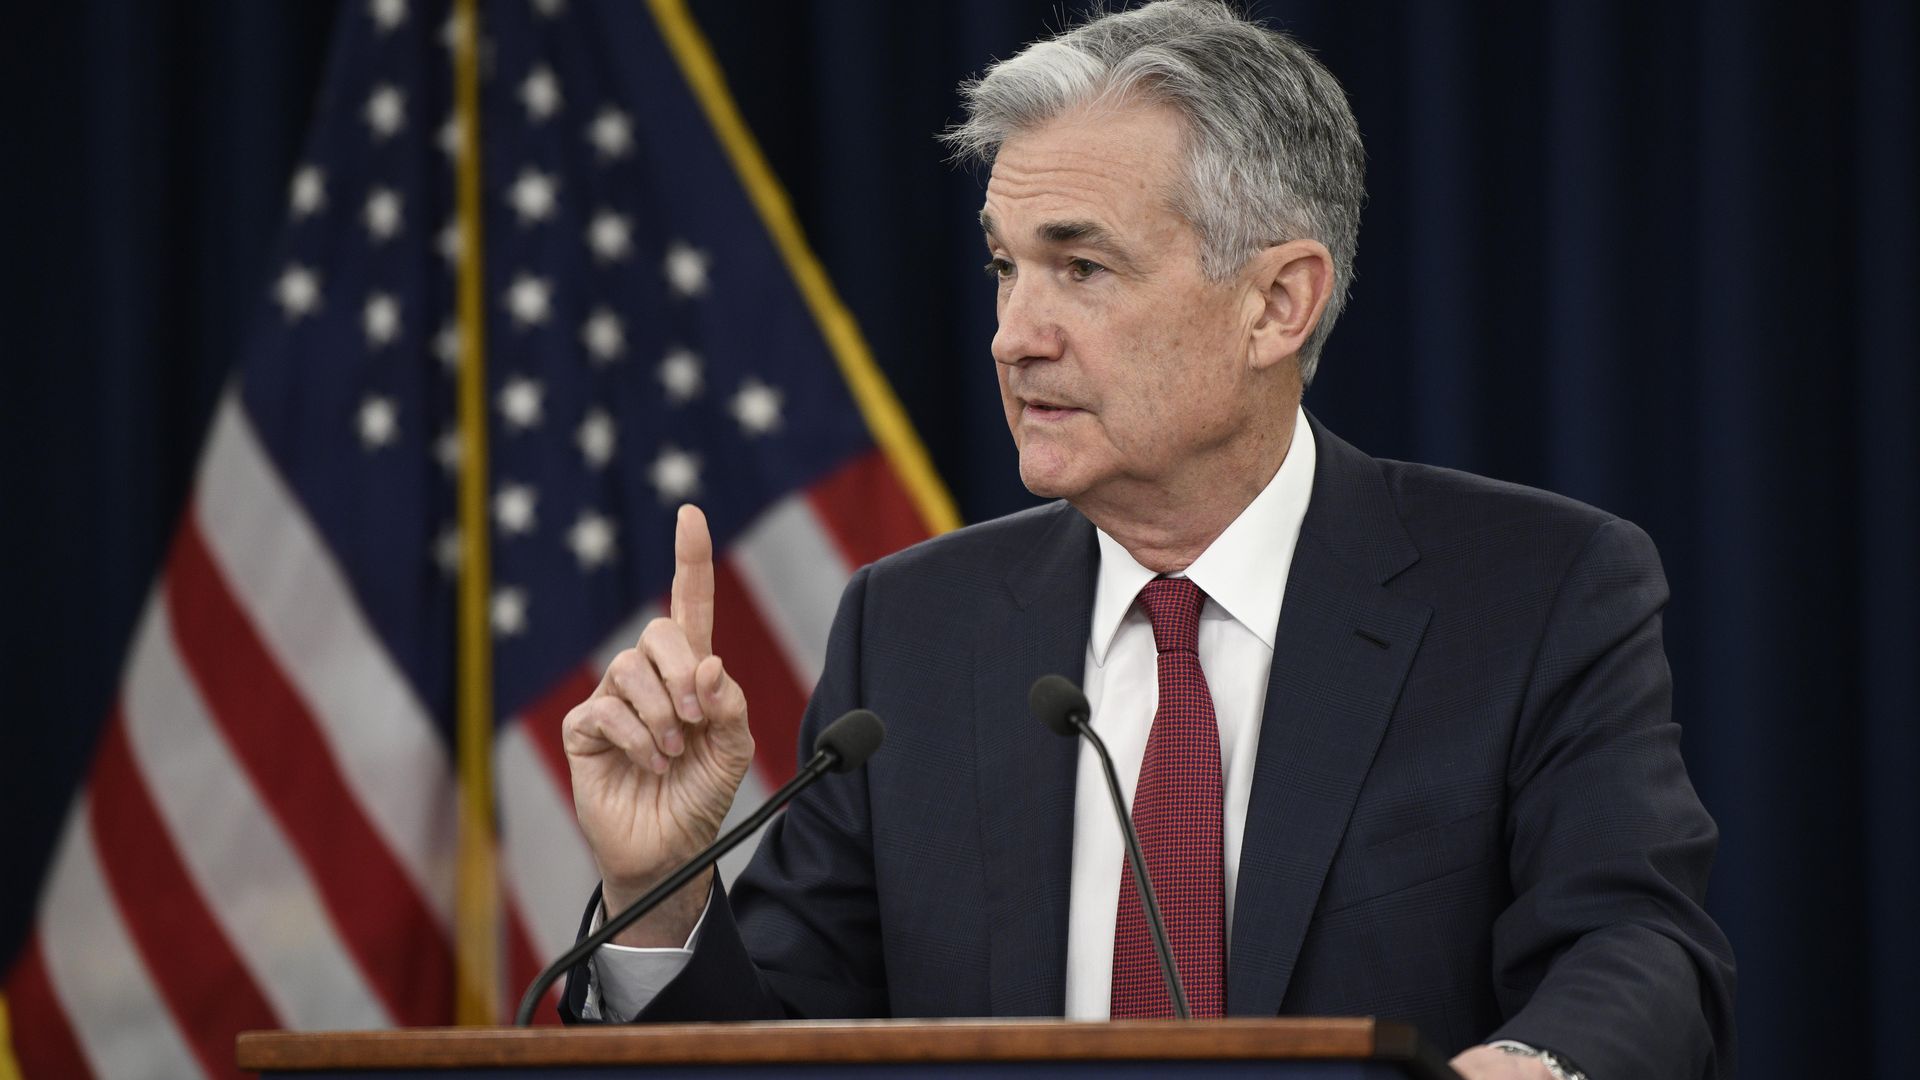 Jerome Powell speaks during a press conference on Dec. 19, 2018.